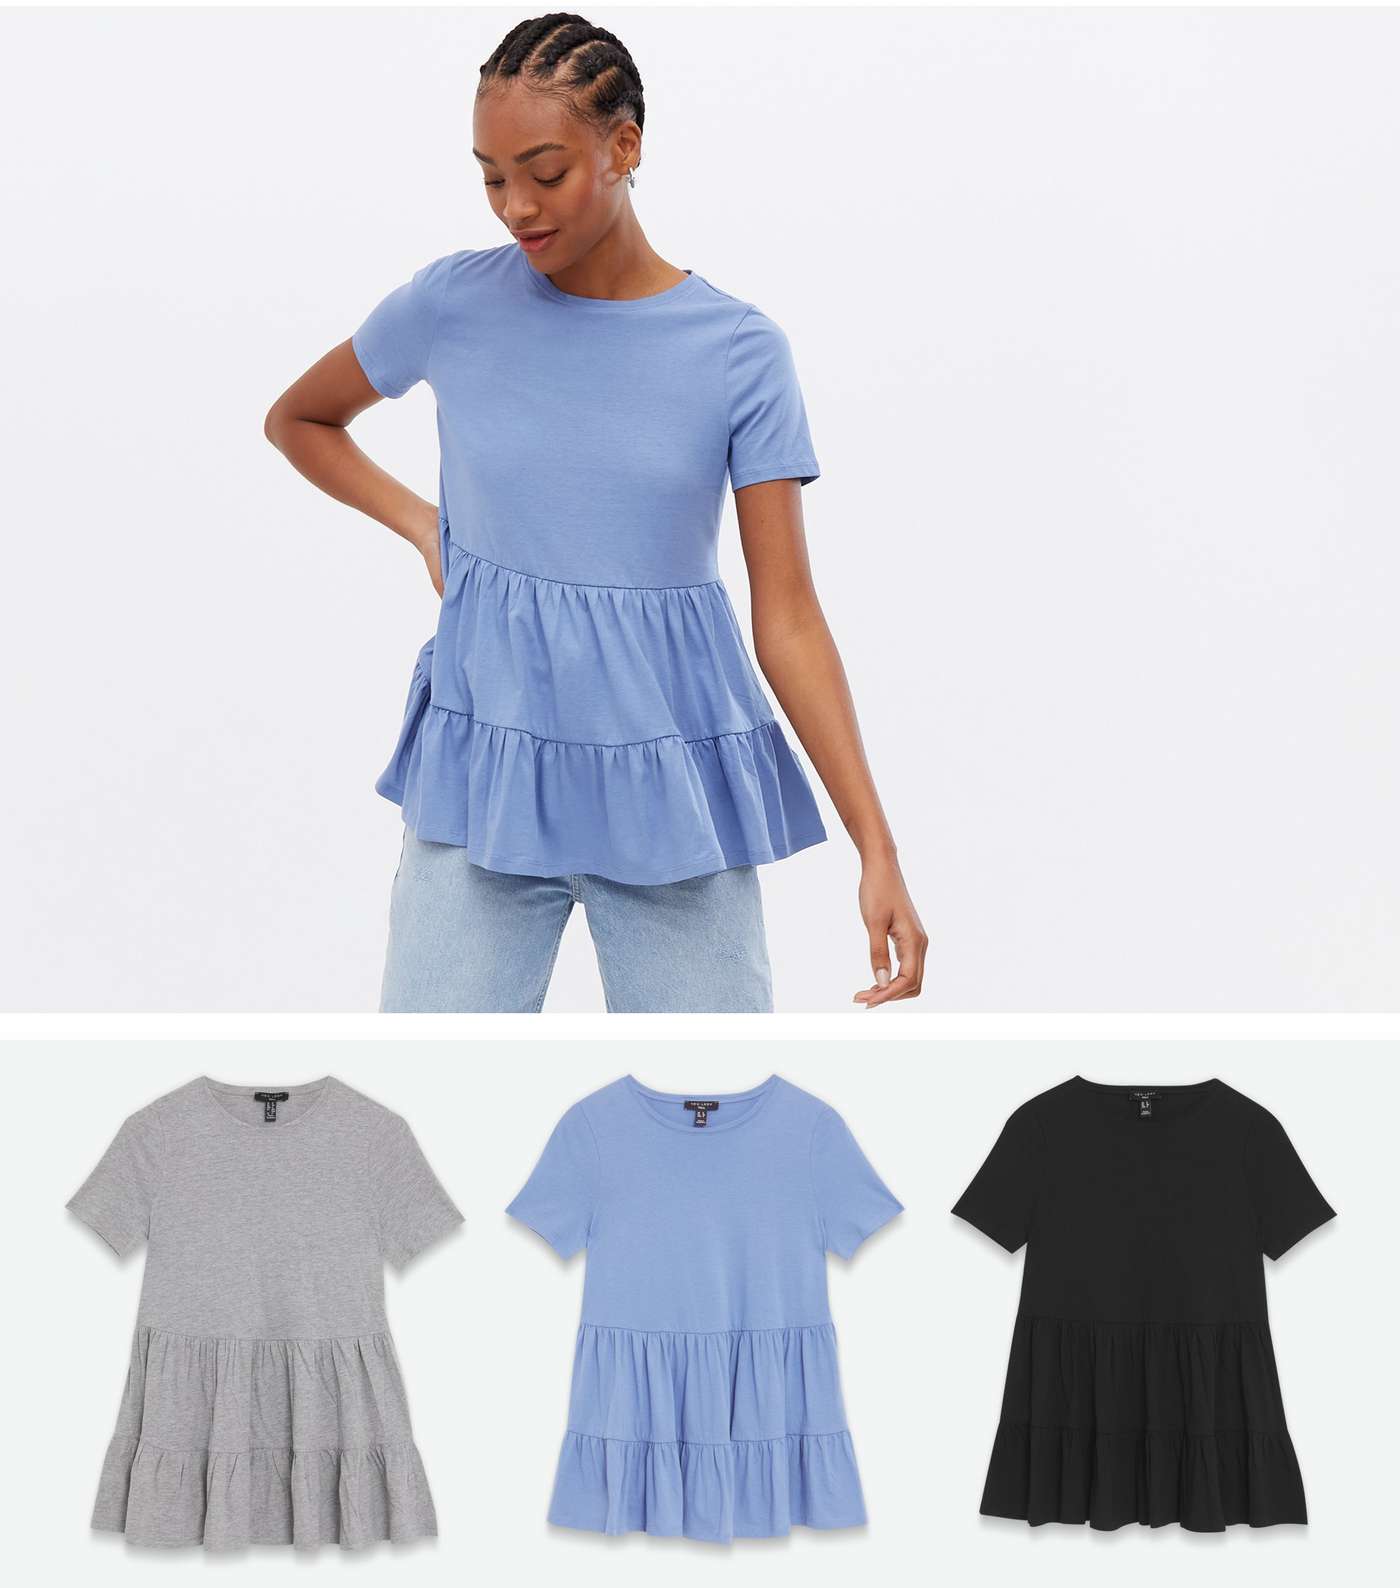 Tall 3 Pack Grey Blue and Black Tiered Peplum T-Shirts